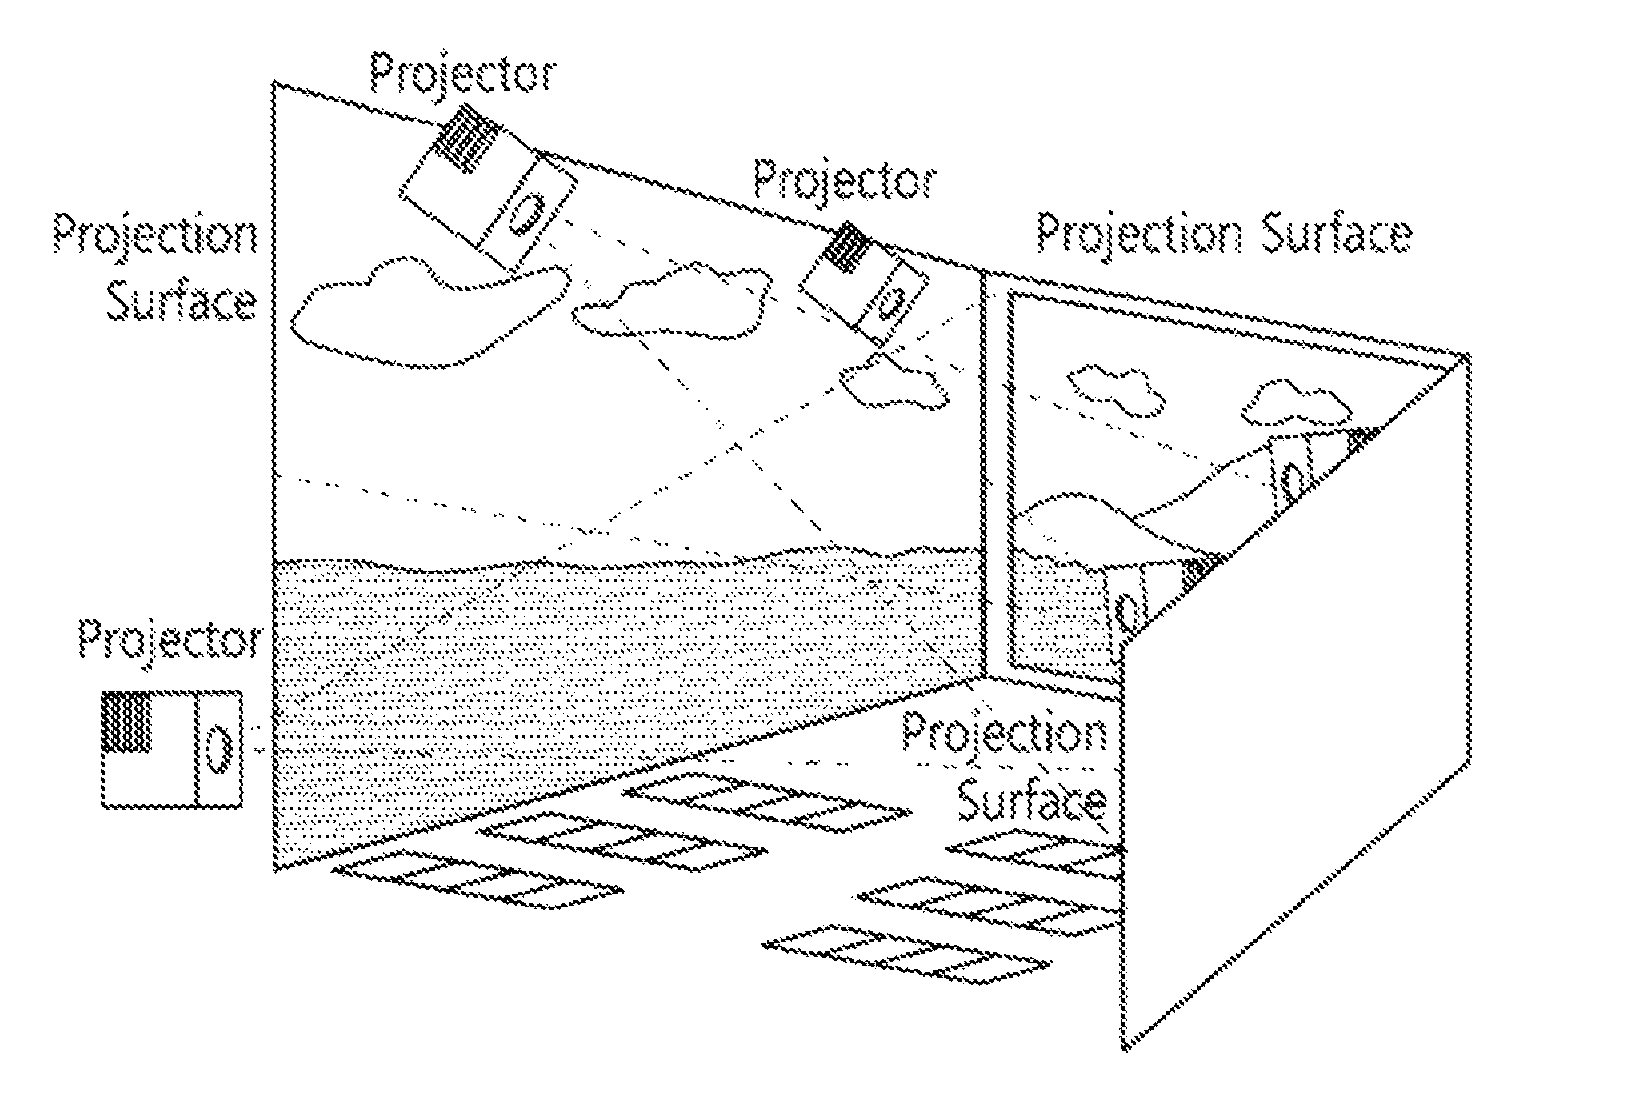 Multi-projection system